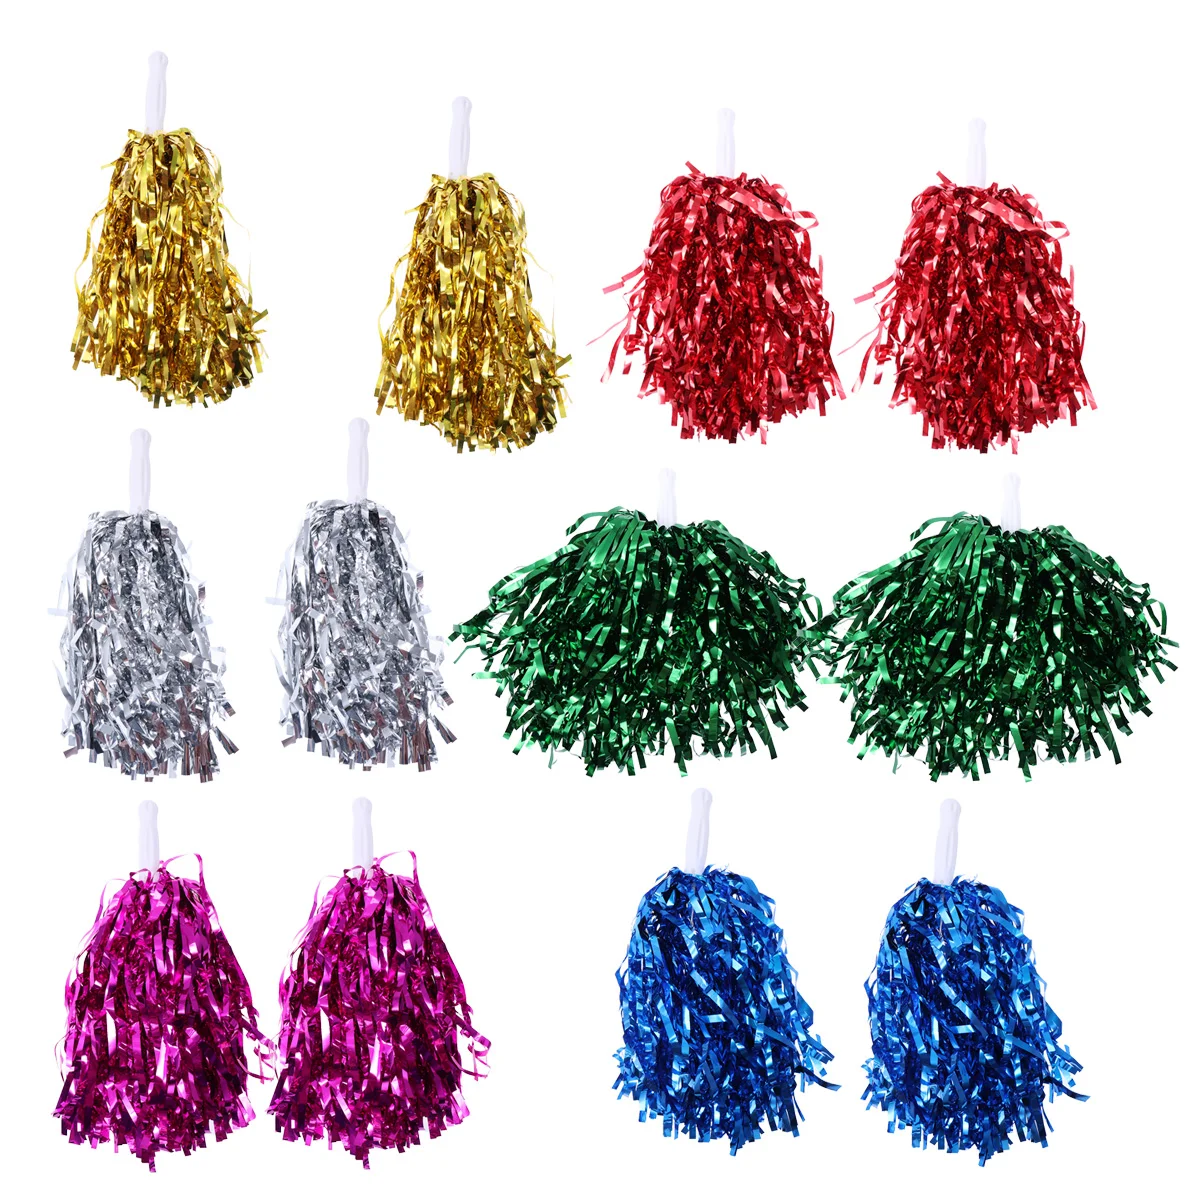 

12PCS Straight Handle Cheering Poms Cheerleading Kit Cheer Props for Performance Competition Cheering Sports Events (Random Gym